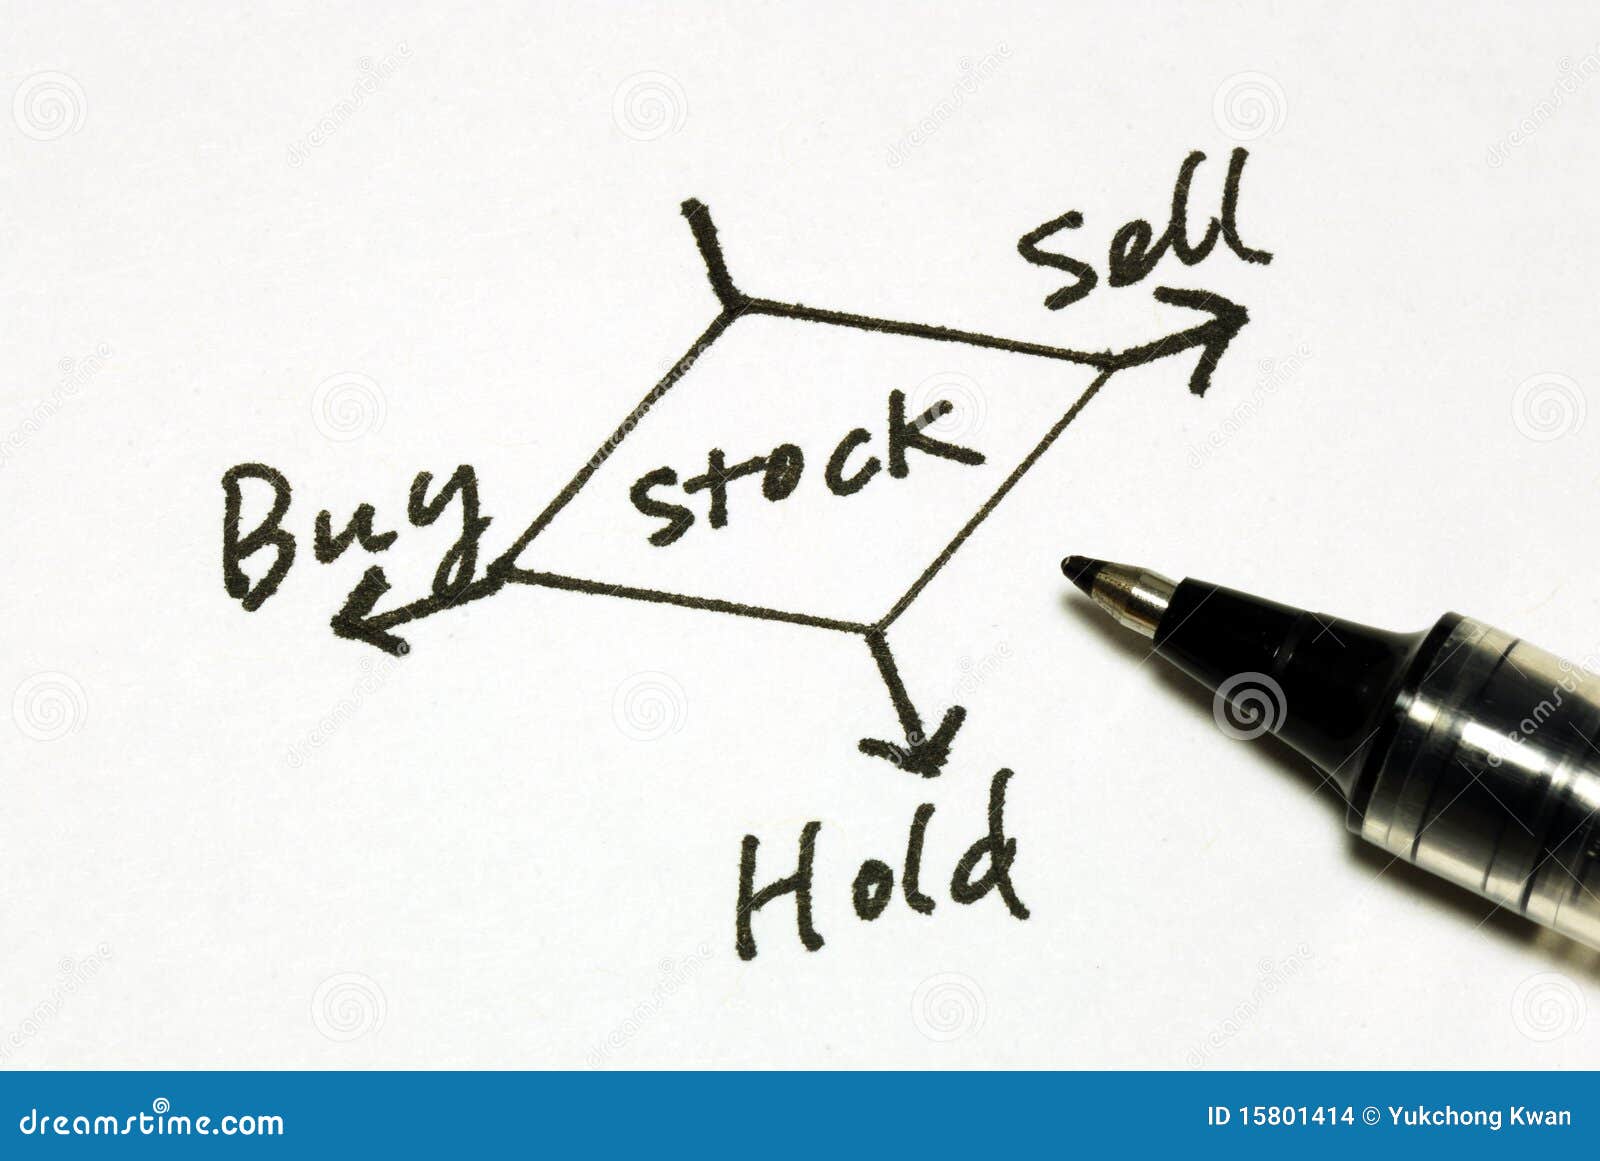 Factors Affecting the Direction of Stock Prices